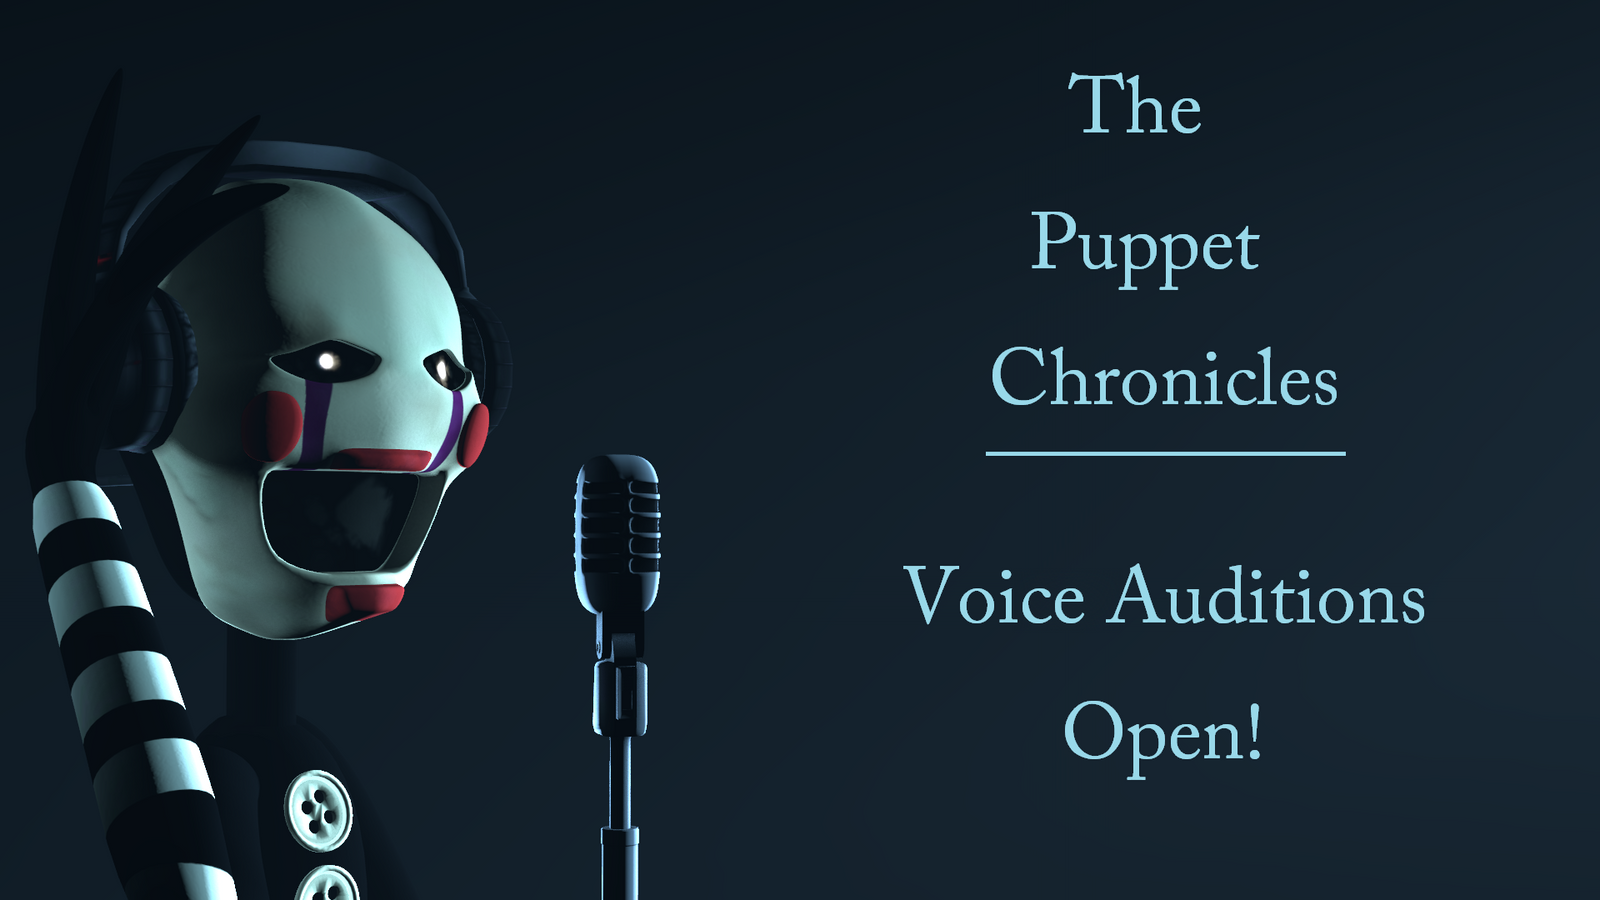 Fnaf voices. Scratchy Voice. Echo & the Bunnymen the Puppet. FNAF Voice lines animated перевод.